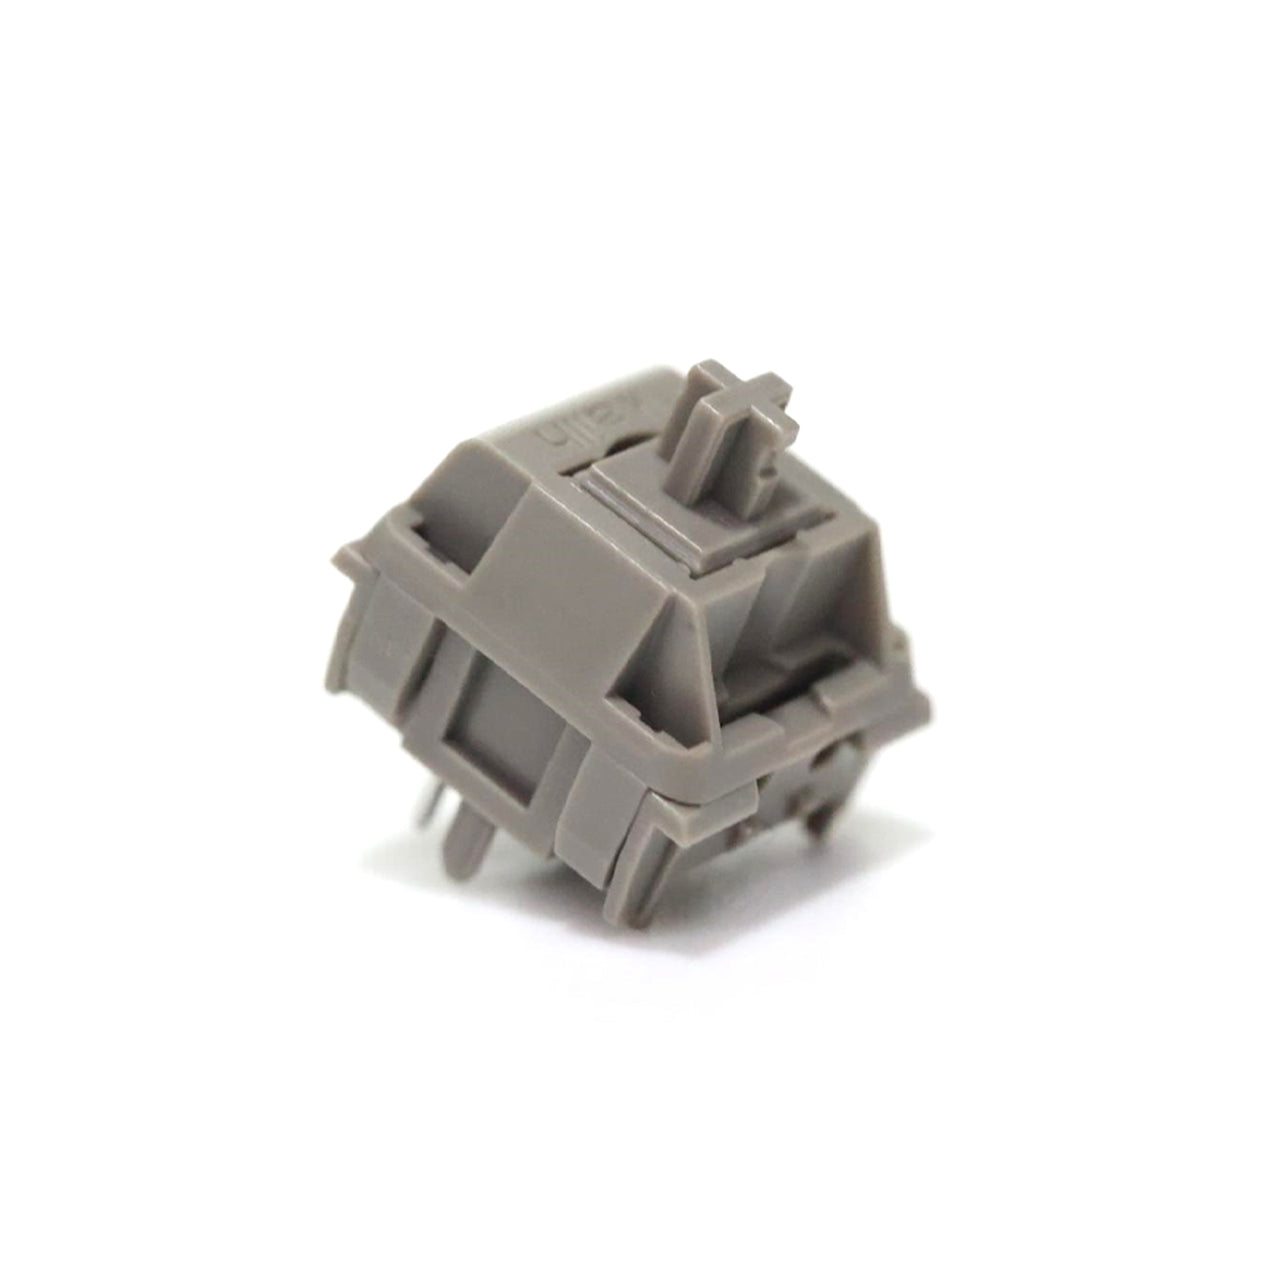 Kailh Cream Tactile Switch-Chosfox